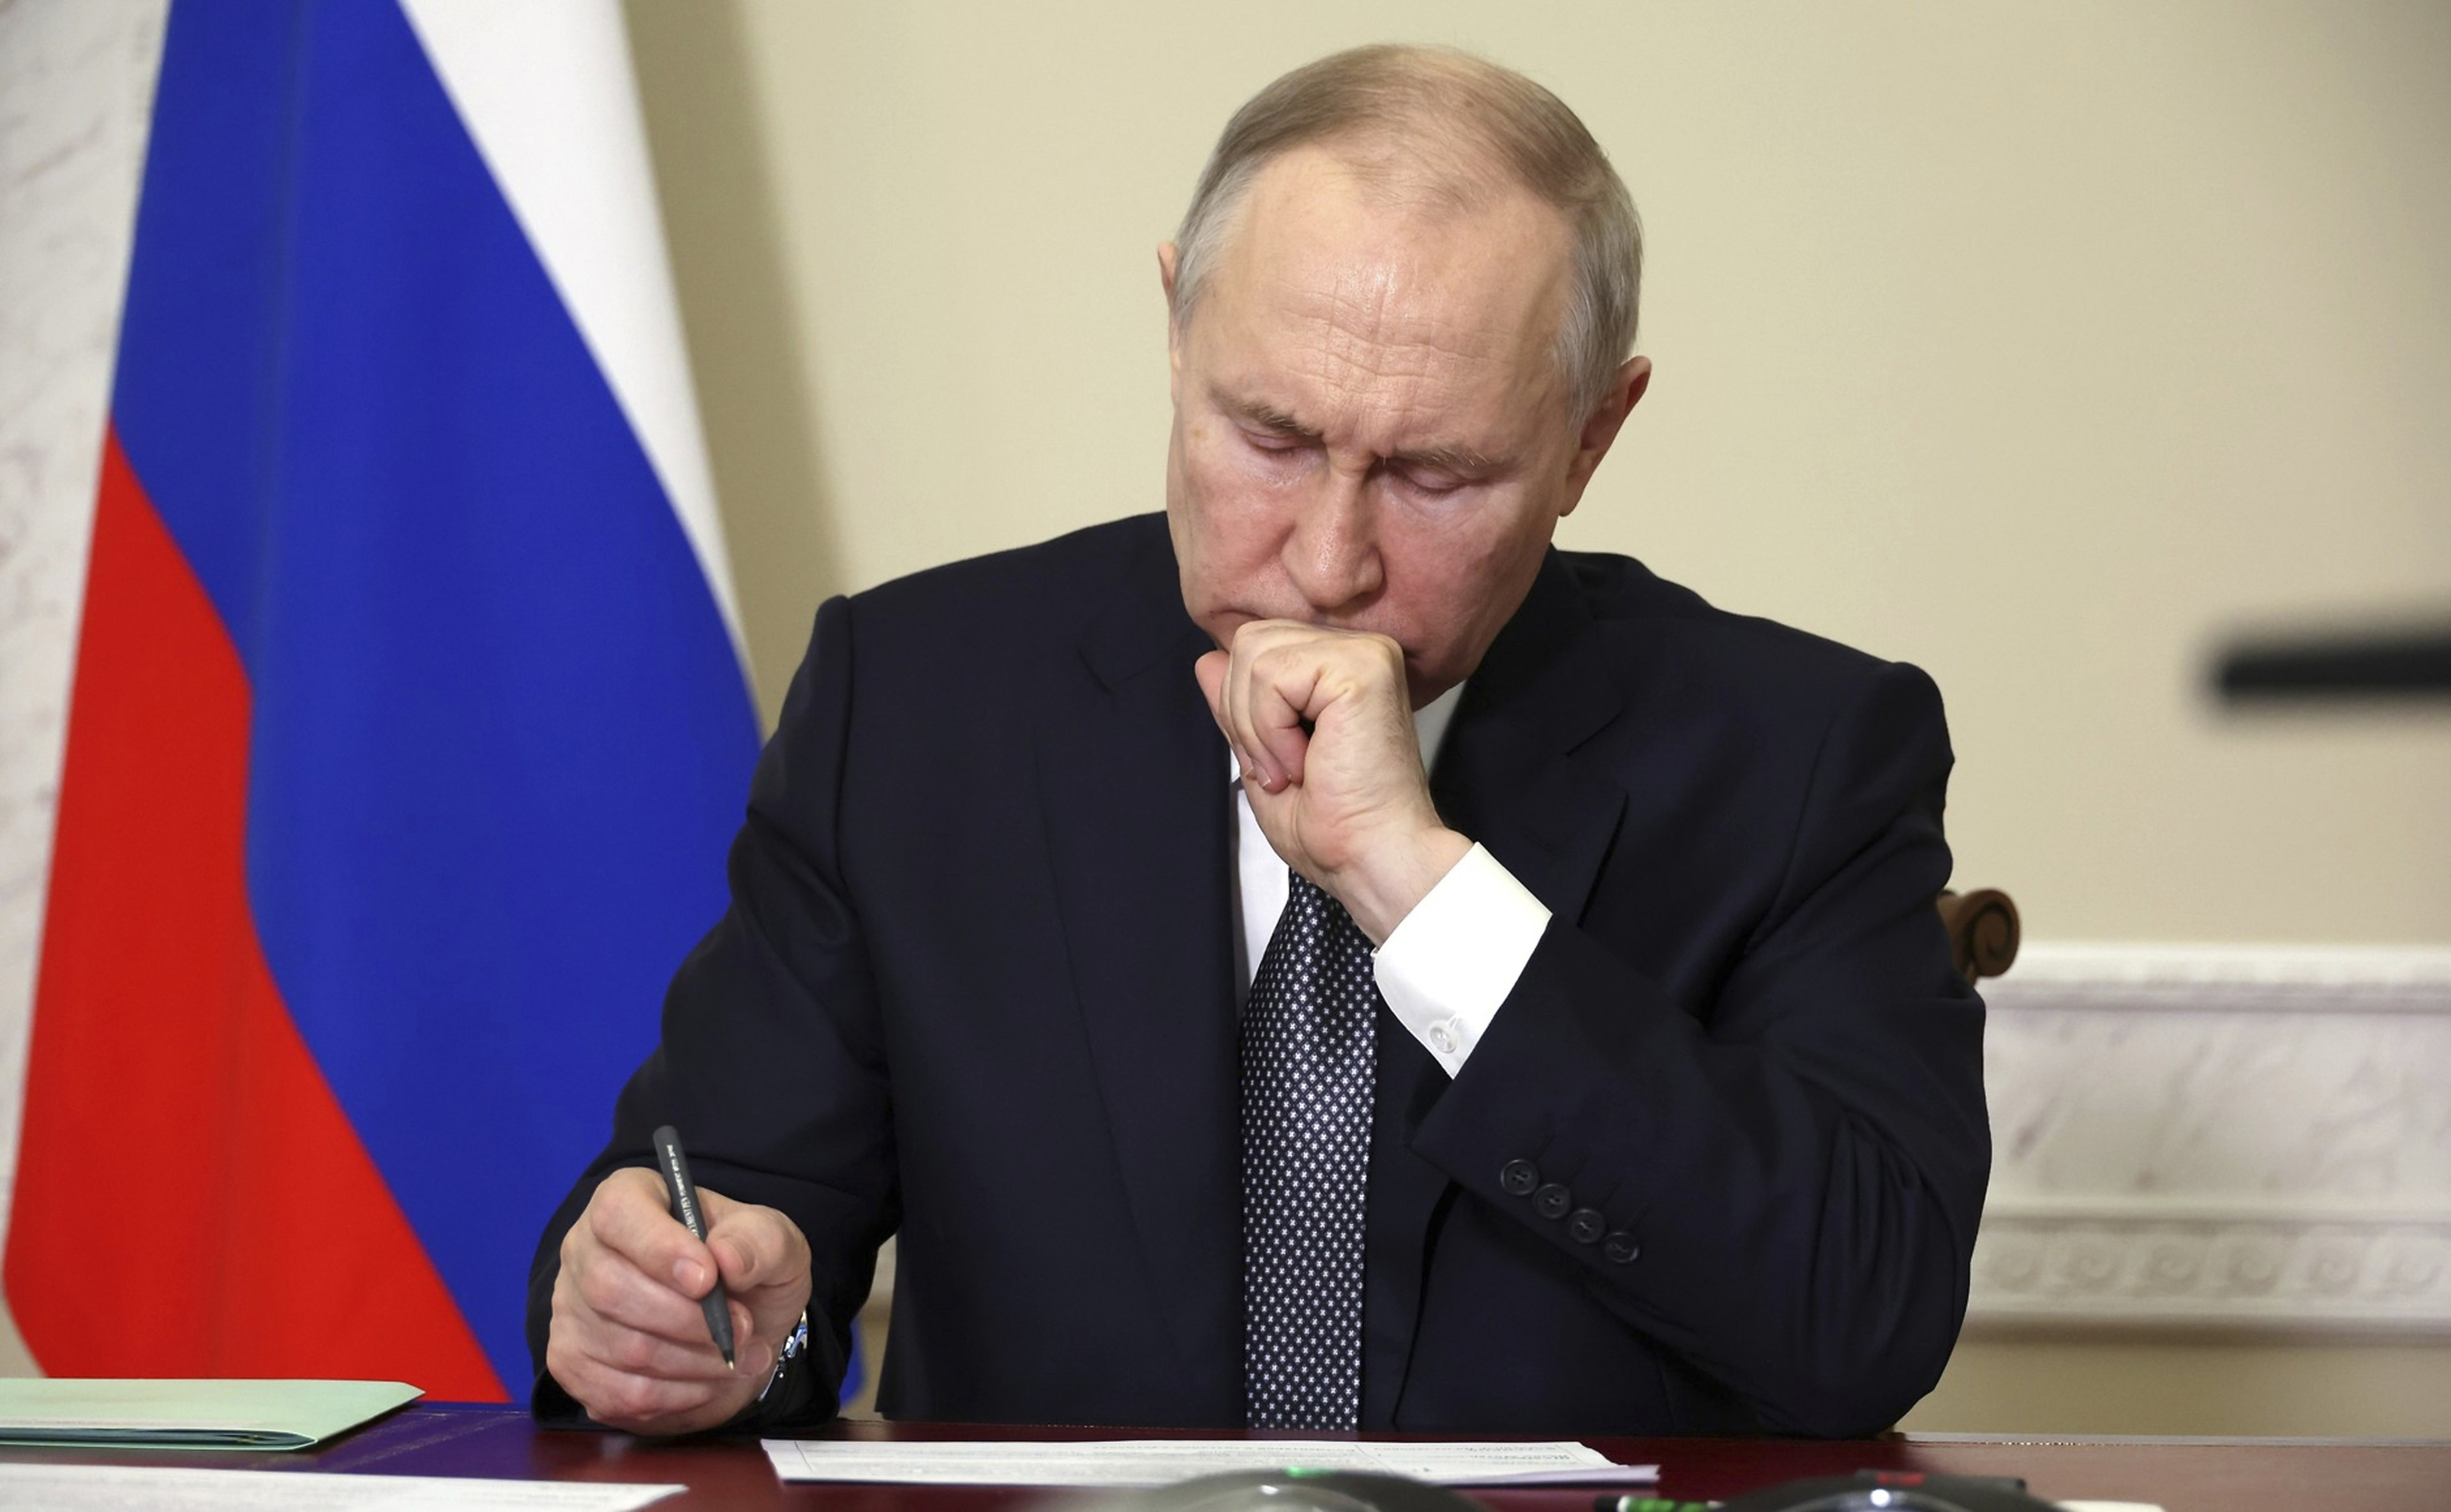 May 2, 2023, St Petersburg, Moscow Oblast, Russia: Russian President Vladimir Putin holds a video conference meeting with members of the government, May 2, 2023 in St Petersburg, Russia. The meeting including discussion on the wildfire effecting the Sverd